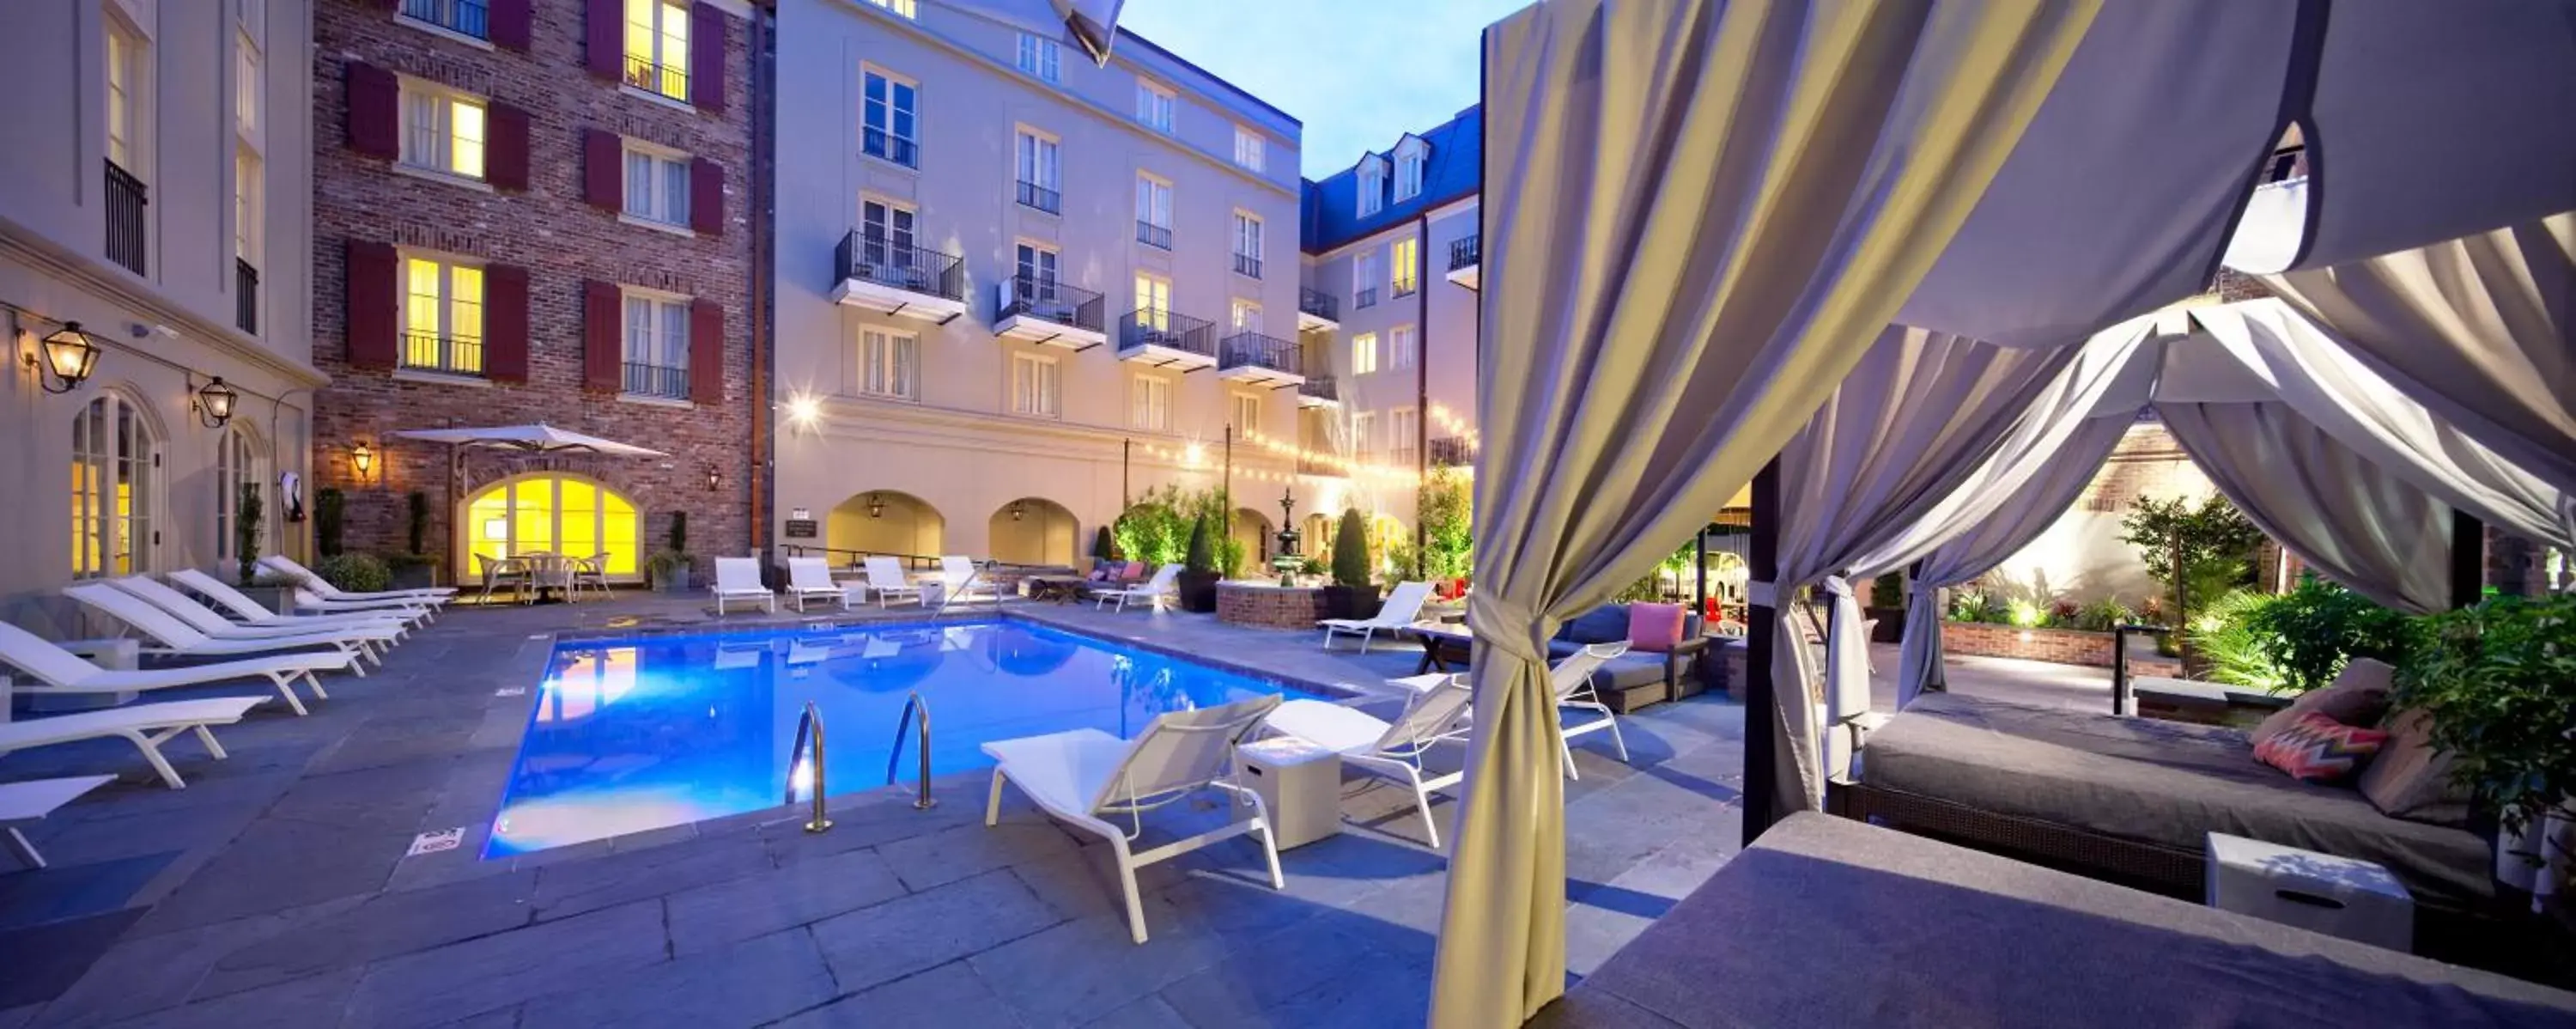 Swimming Pool in Maison Dupuy Hotel